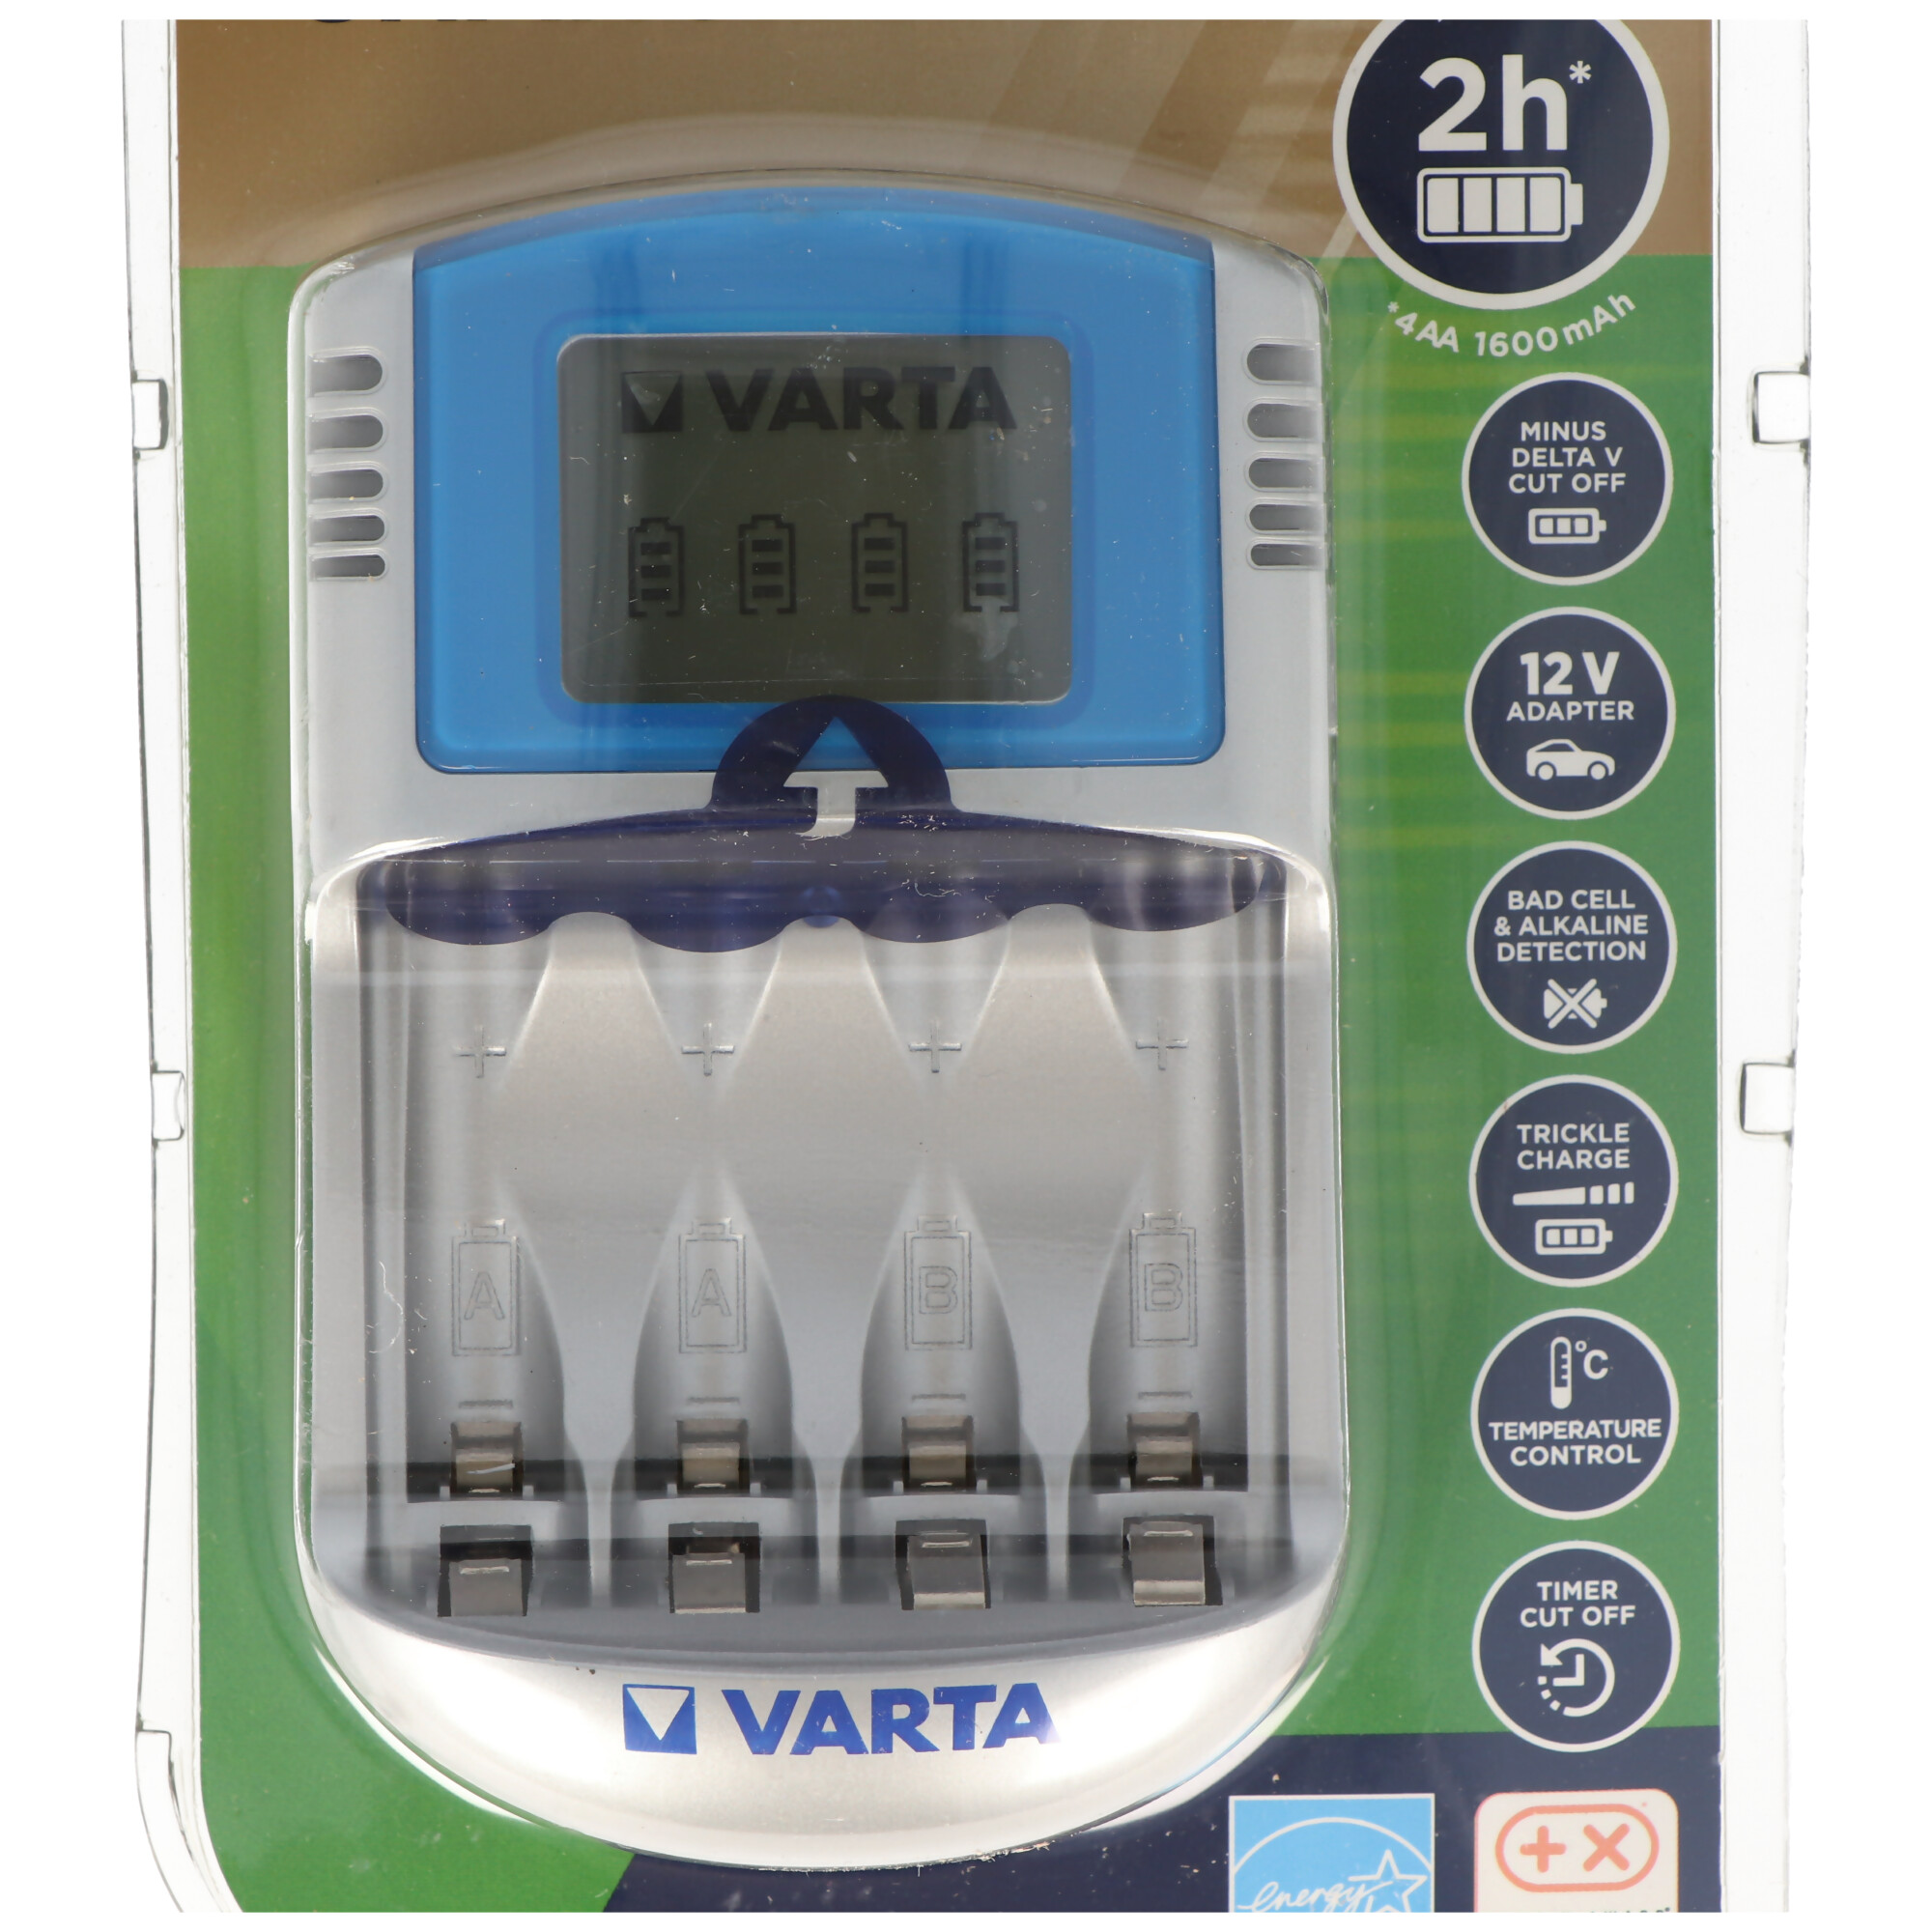 Varta 57070 LCD Charger für 2 oder 4 Mignon/AA oder Micro/AAA